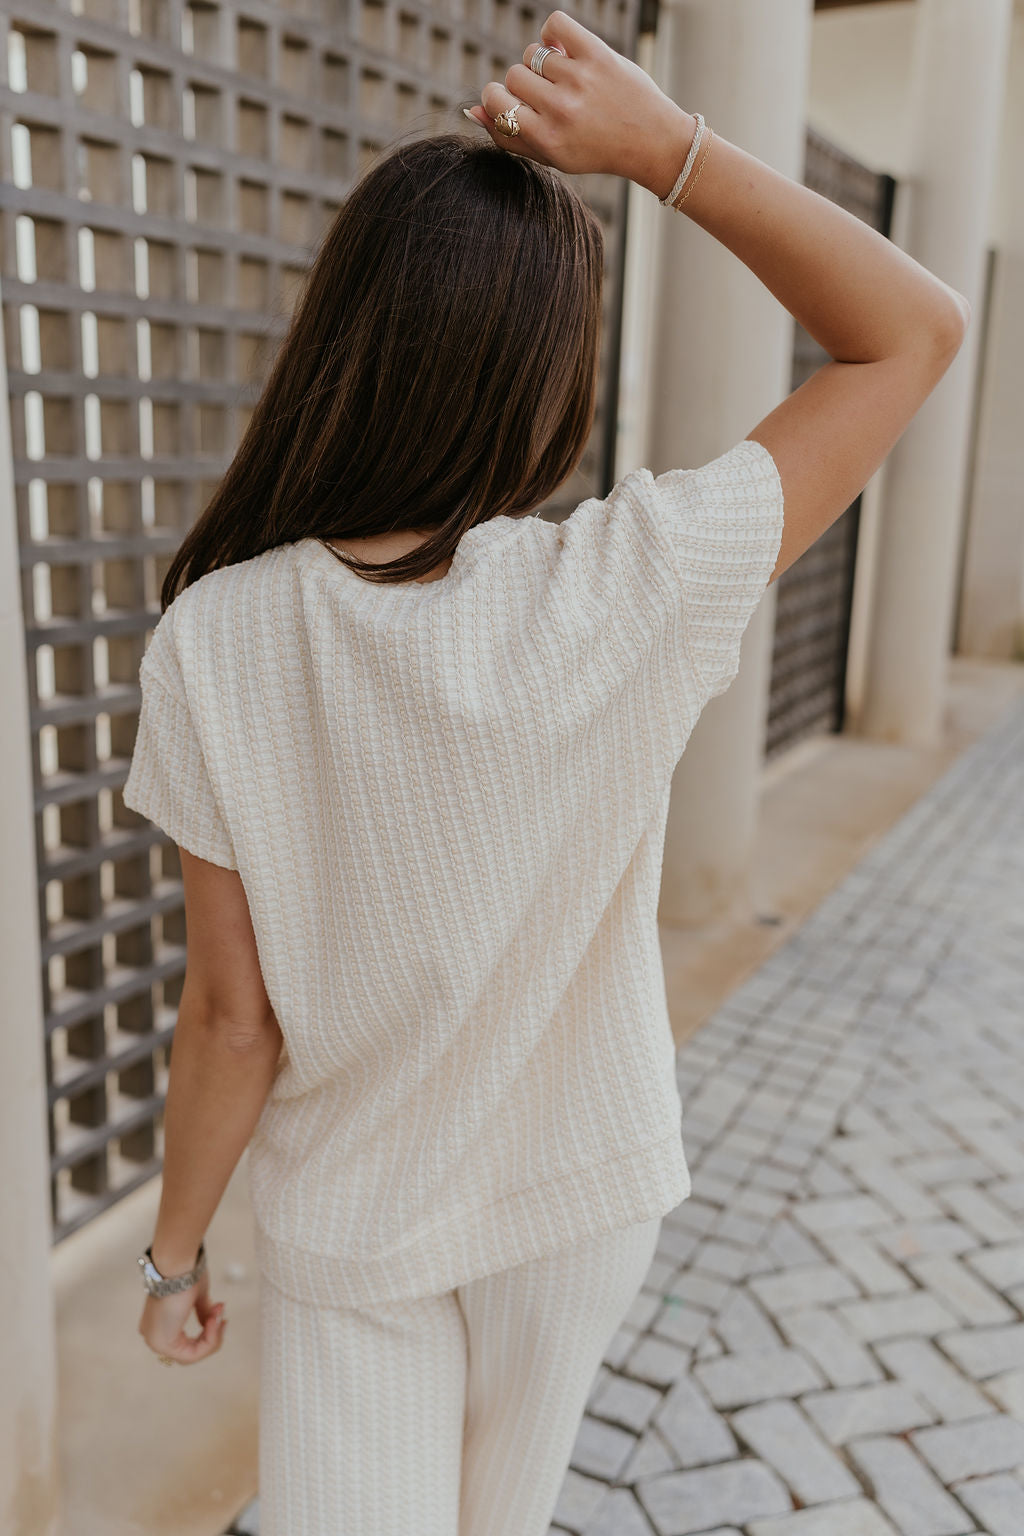 Back view of female model wearing the Willow Cream Woven Short Sleeve Top which features Cream and White Woven Design, Thick Hem, Round Neckline and Short Sleeves